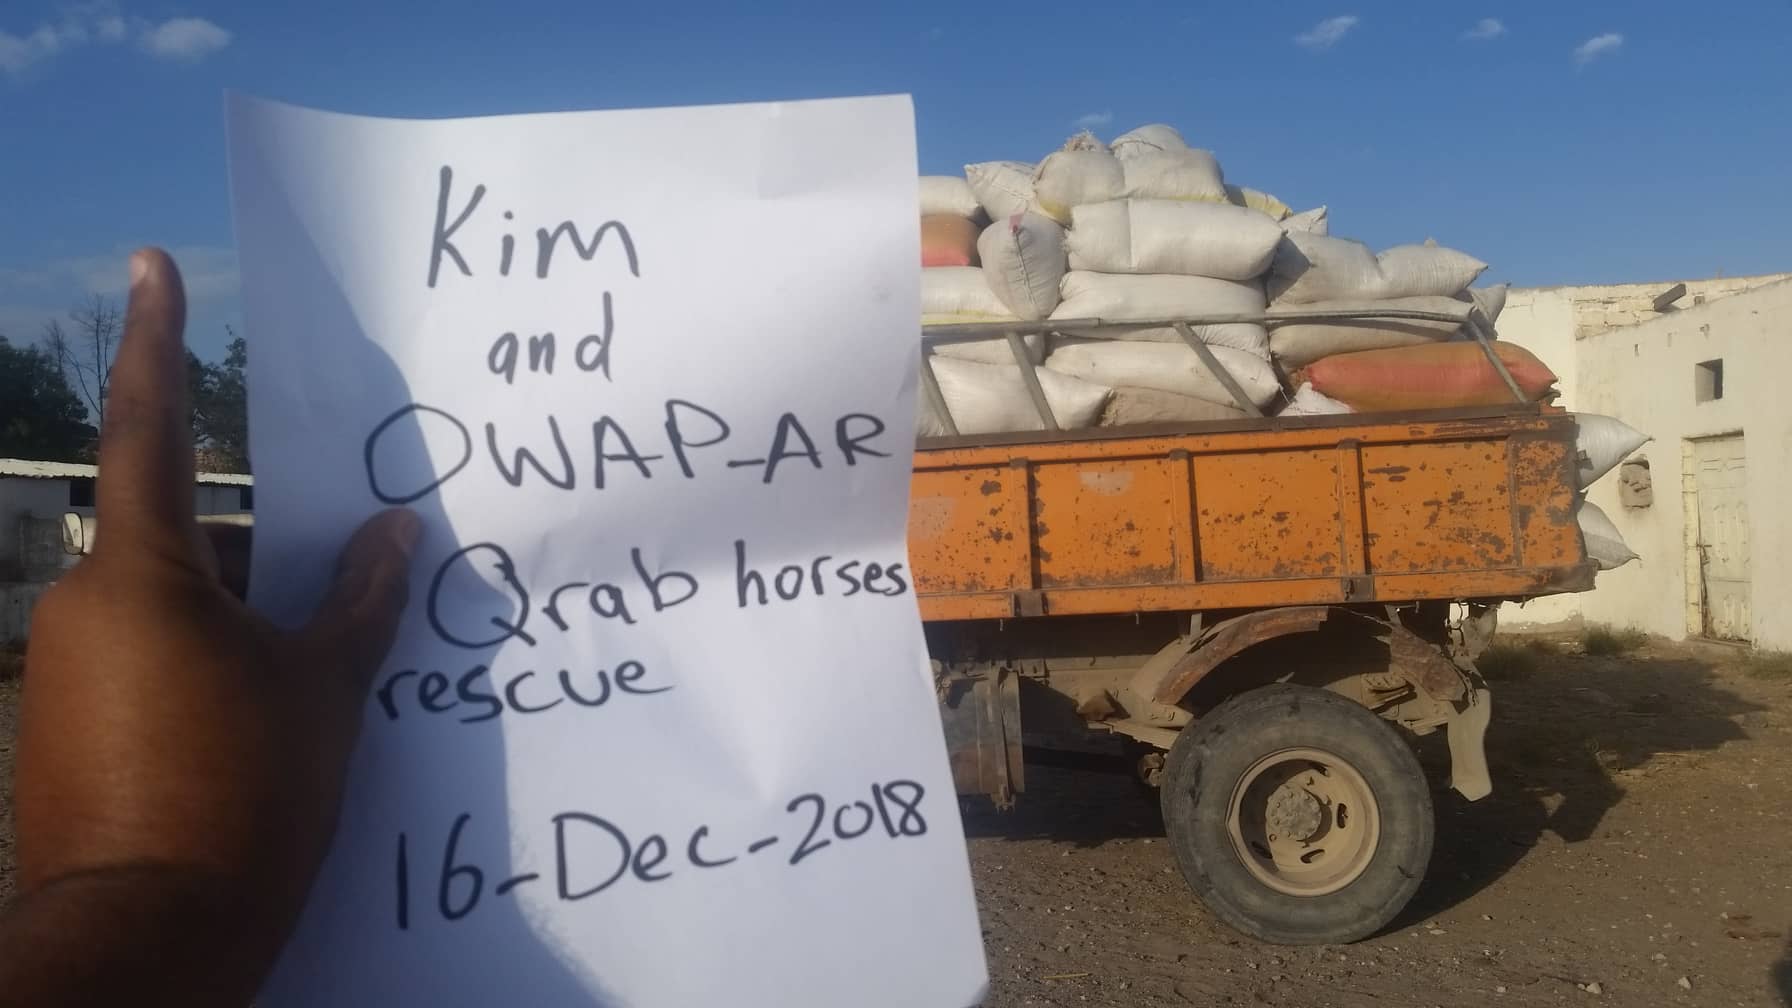 Q'rab 16 DEC 2018 horse rescue dhamar by OWAP-AR with our sign by Hisham Zabedi delivery.jpg